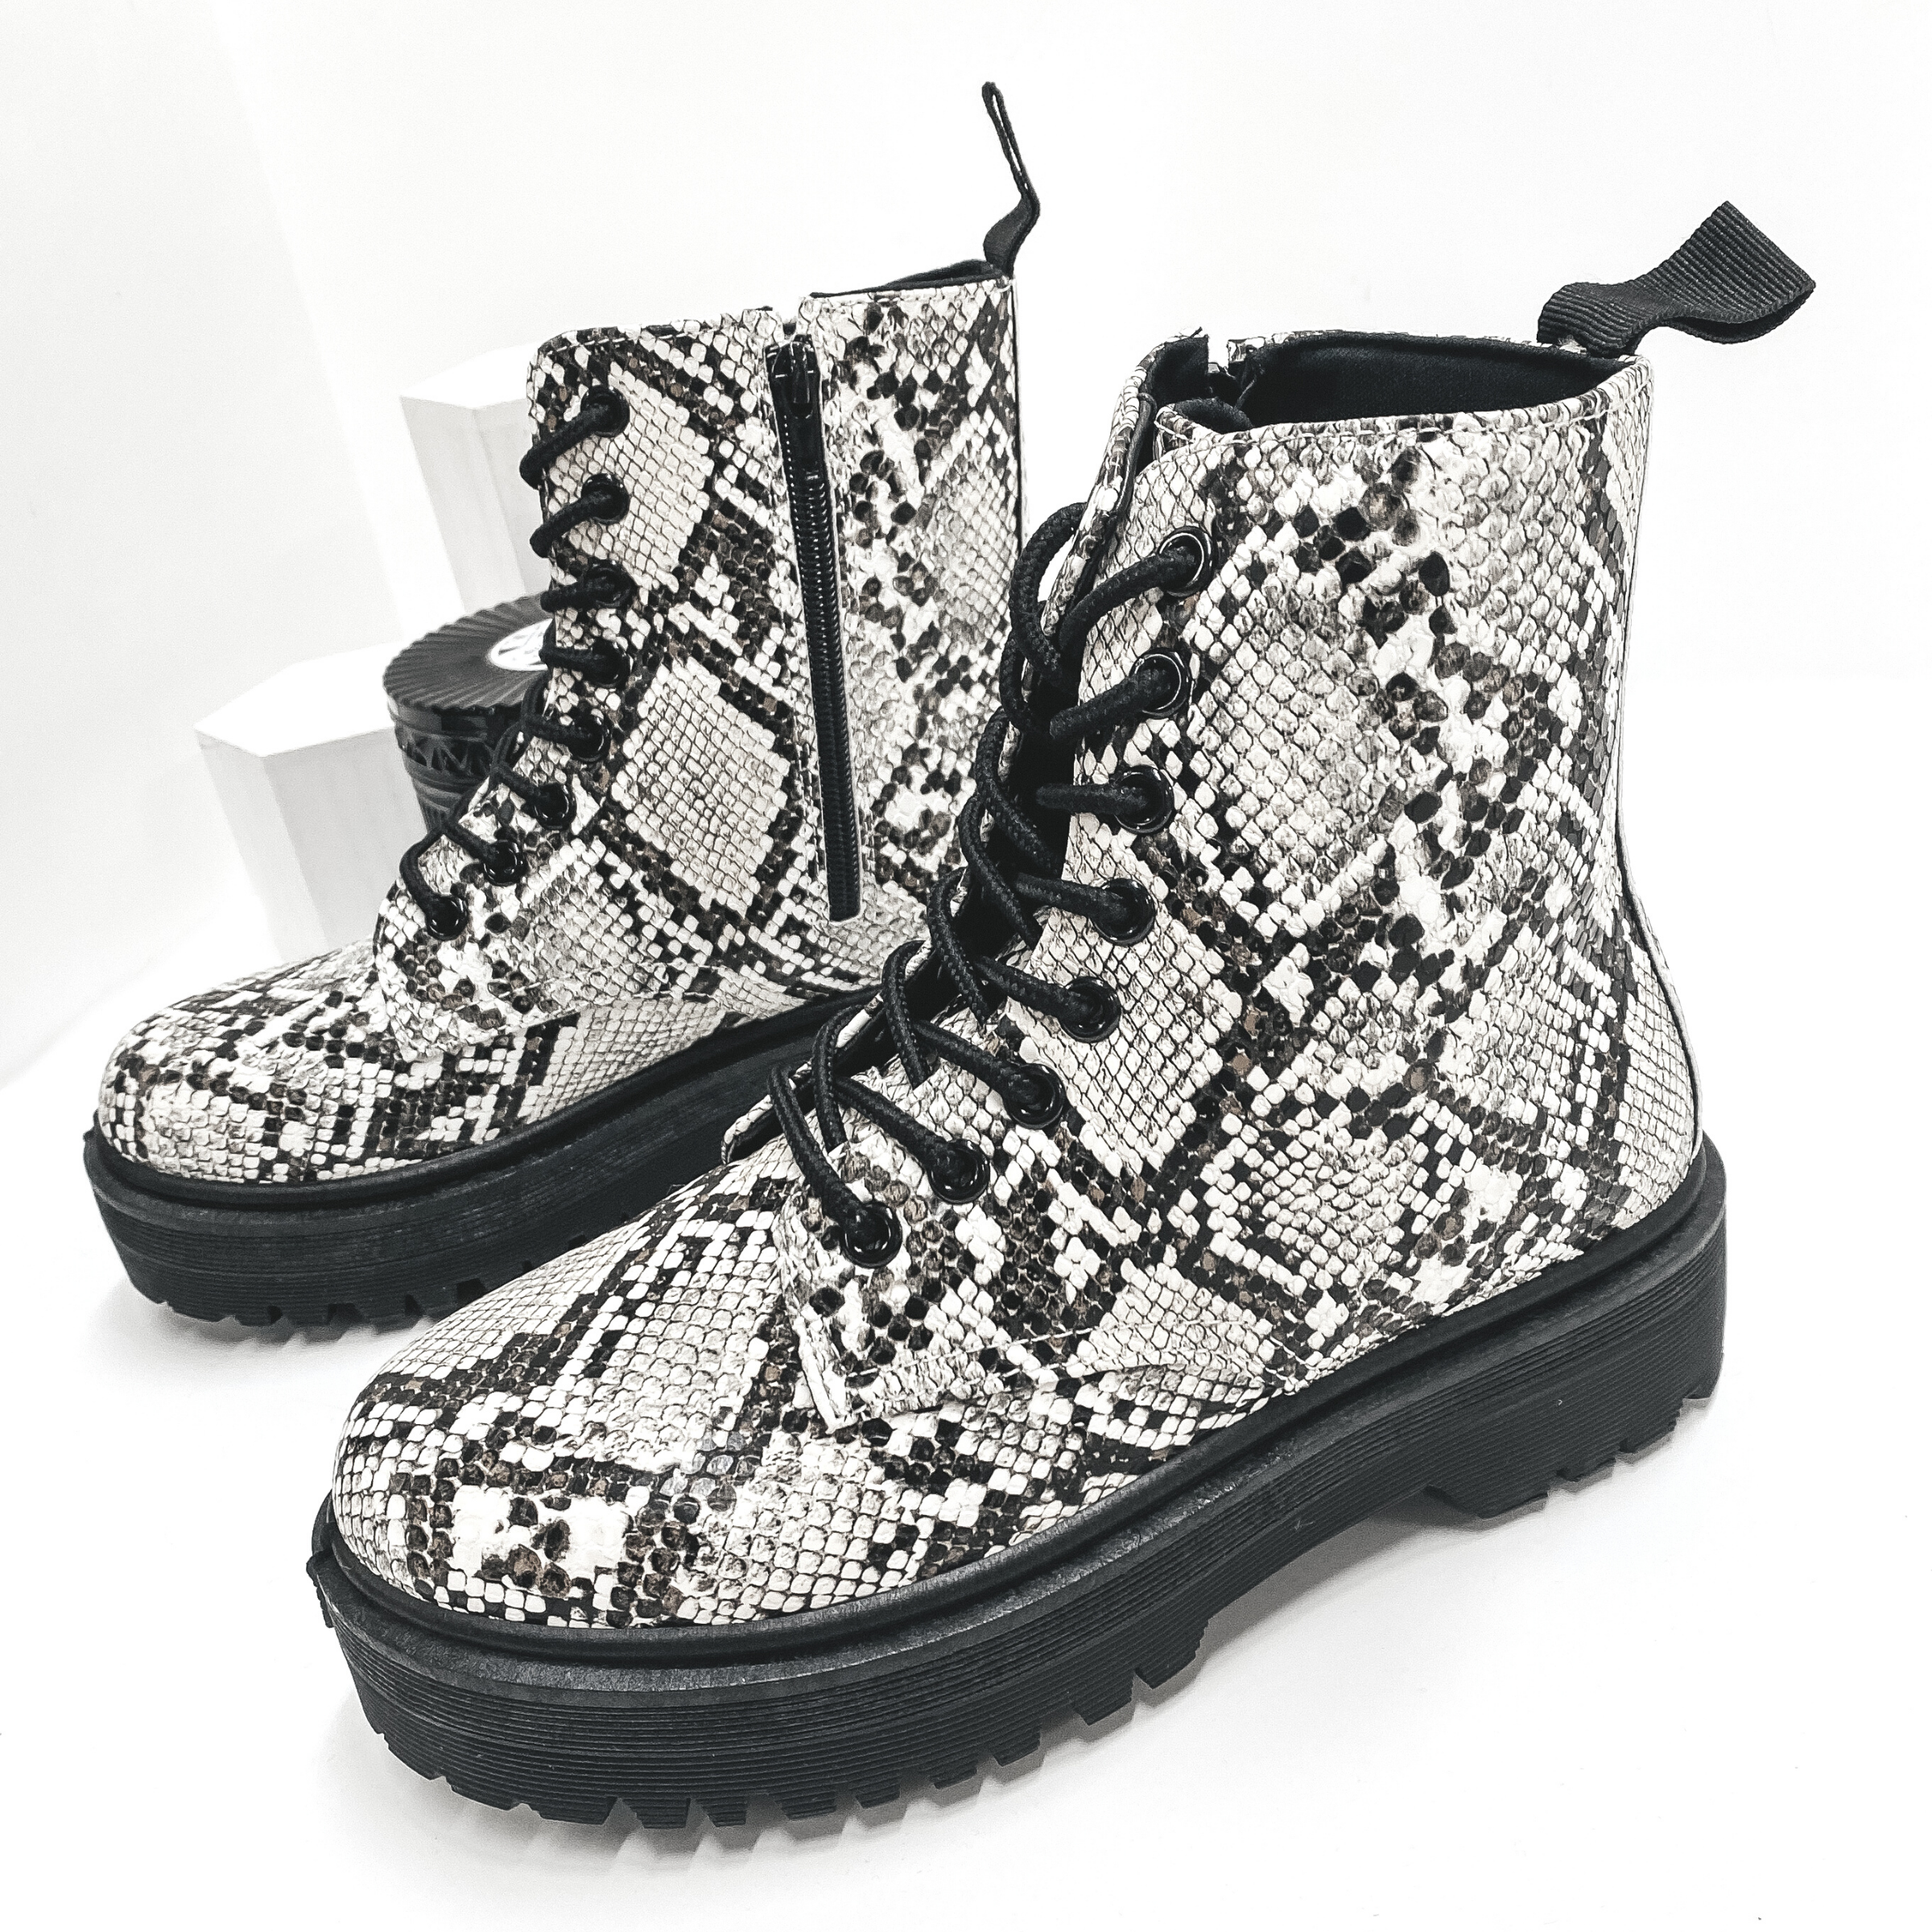 Born to be Wild Combat Boots in Snake - Giddy Up Glamour Boutique